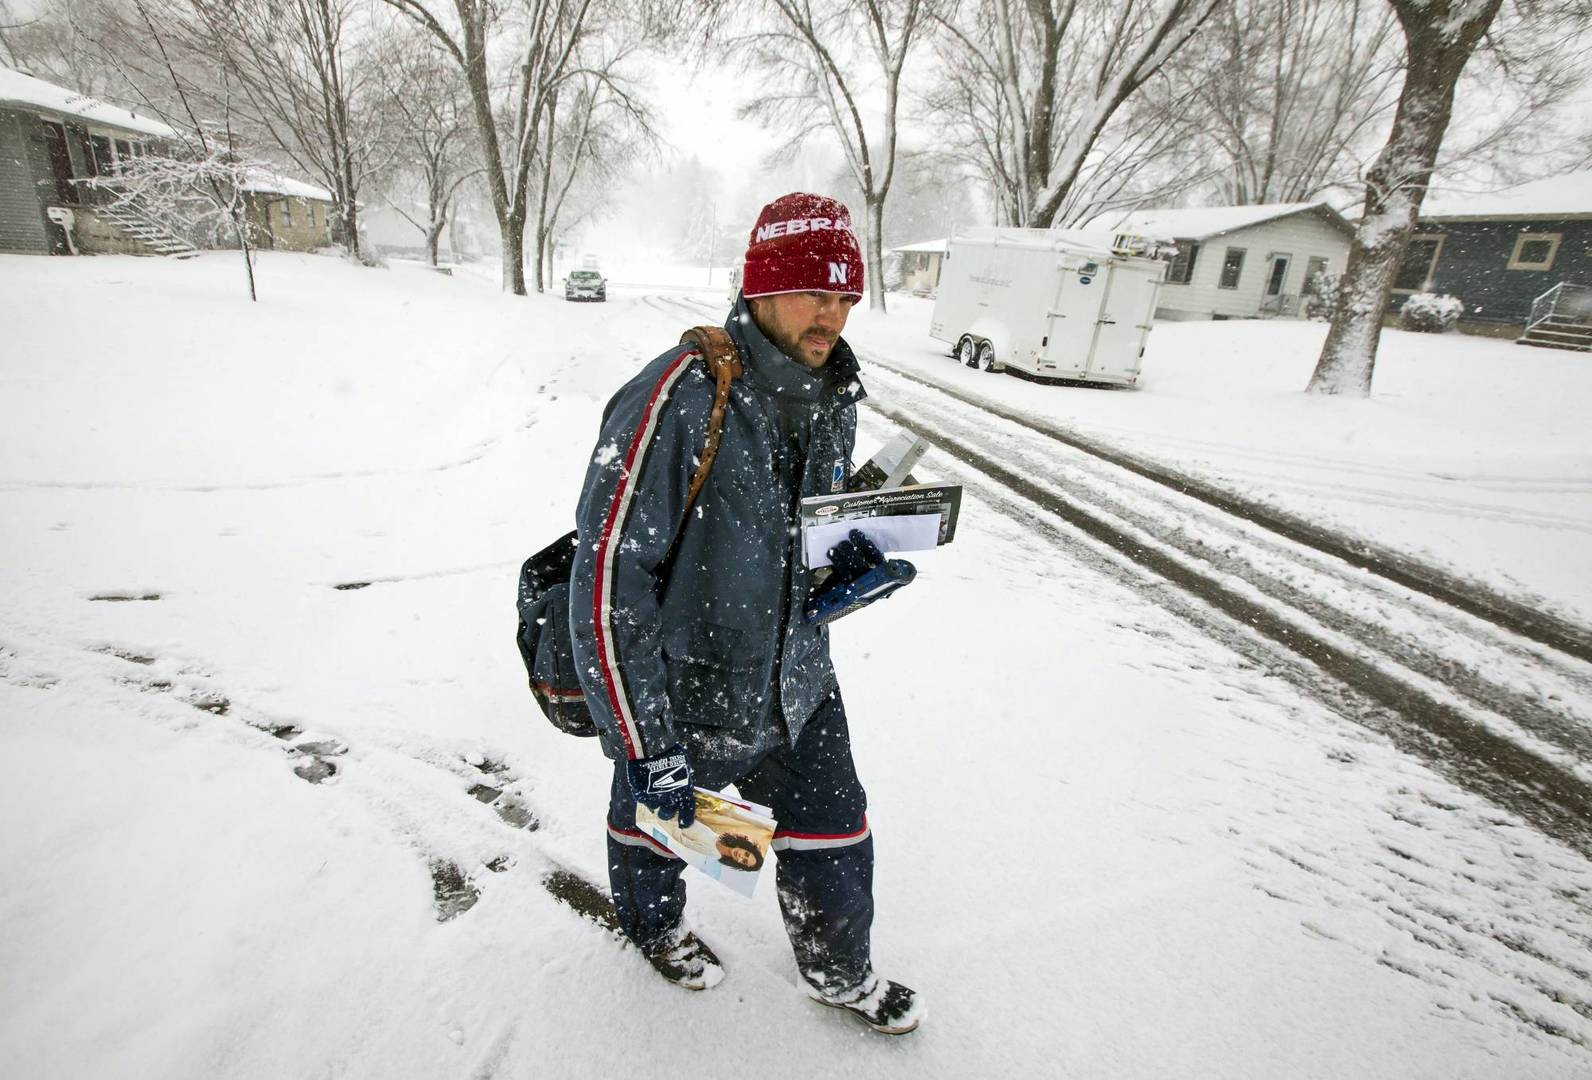 United States Postal Service city carrier Chad Jacobs delivers mail along 16th Avenue Northwest as snow falls, Wednesday, April 10, 2019, in Rochester, Minn. Jacobs said he doesn't mind cold and prefers it over hot days. (Andrew Link/The Rochester Post-Bulletin via AP)